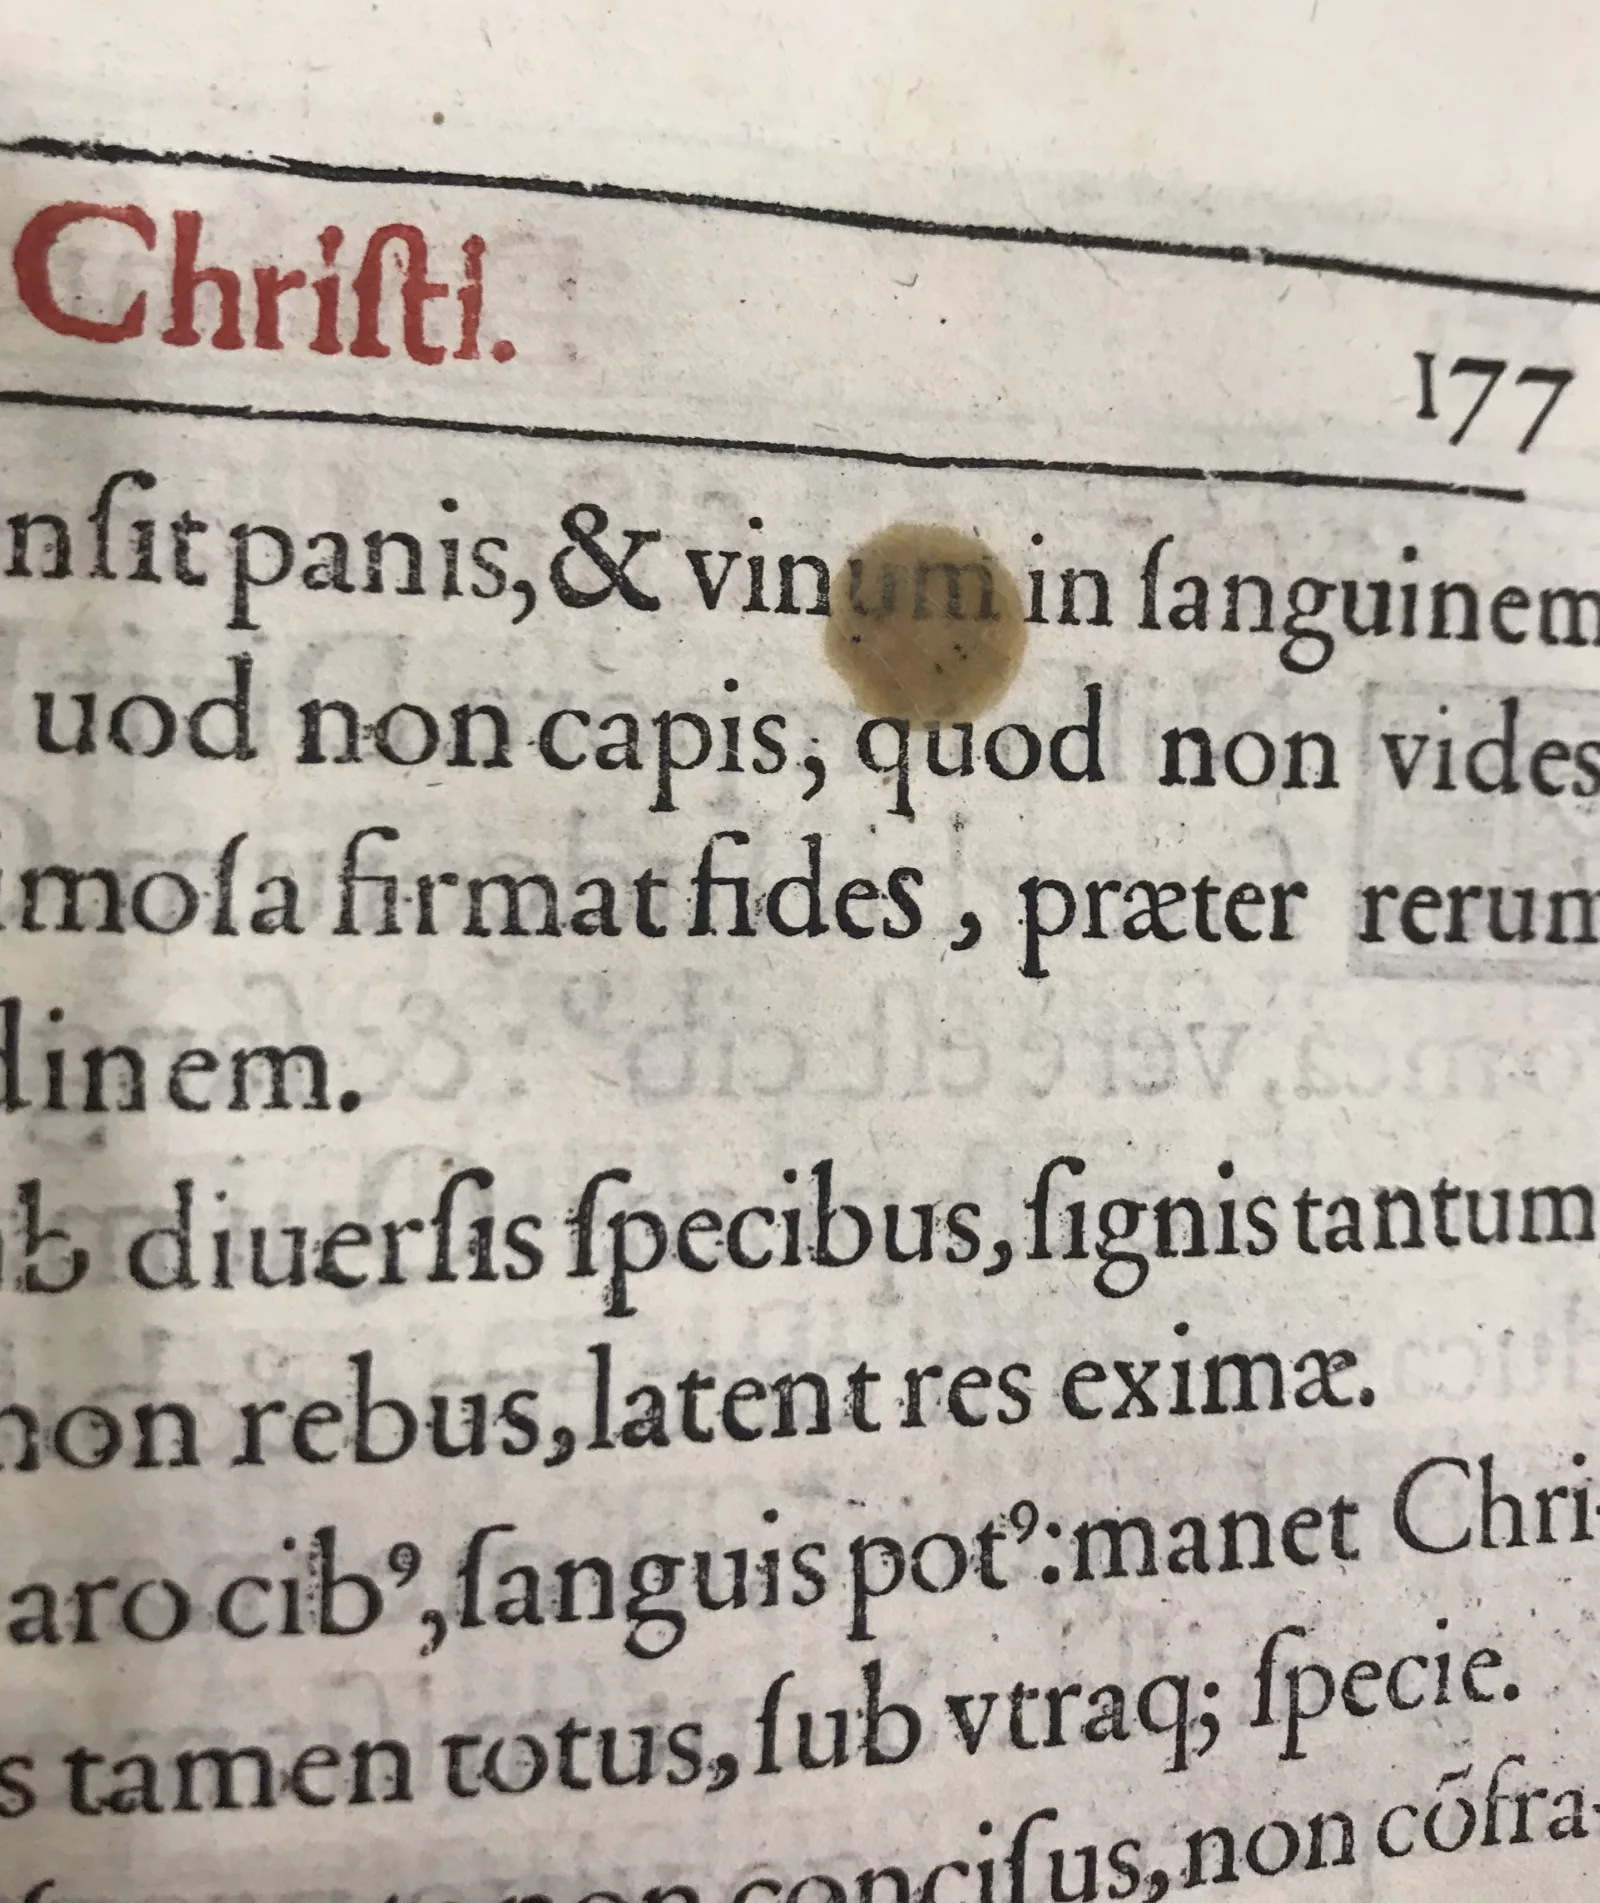 A drop of candle wax has fallen onto the word “vinum” during the celebration of the Feast of Corpus Christi.